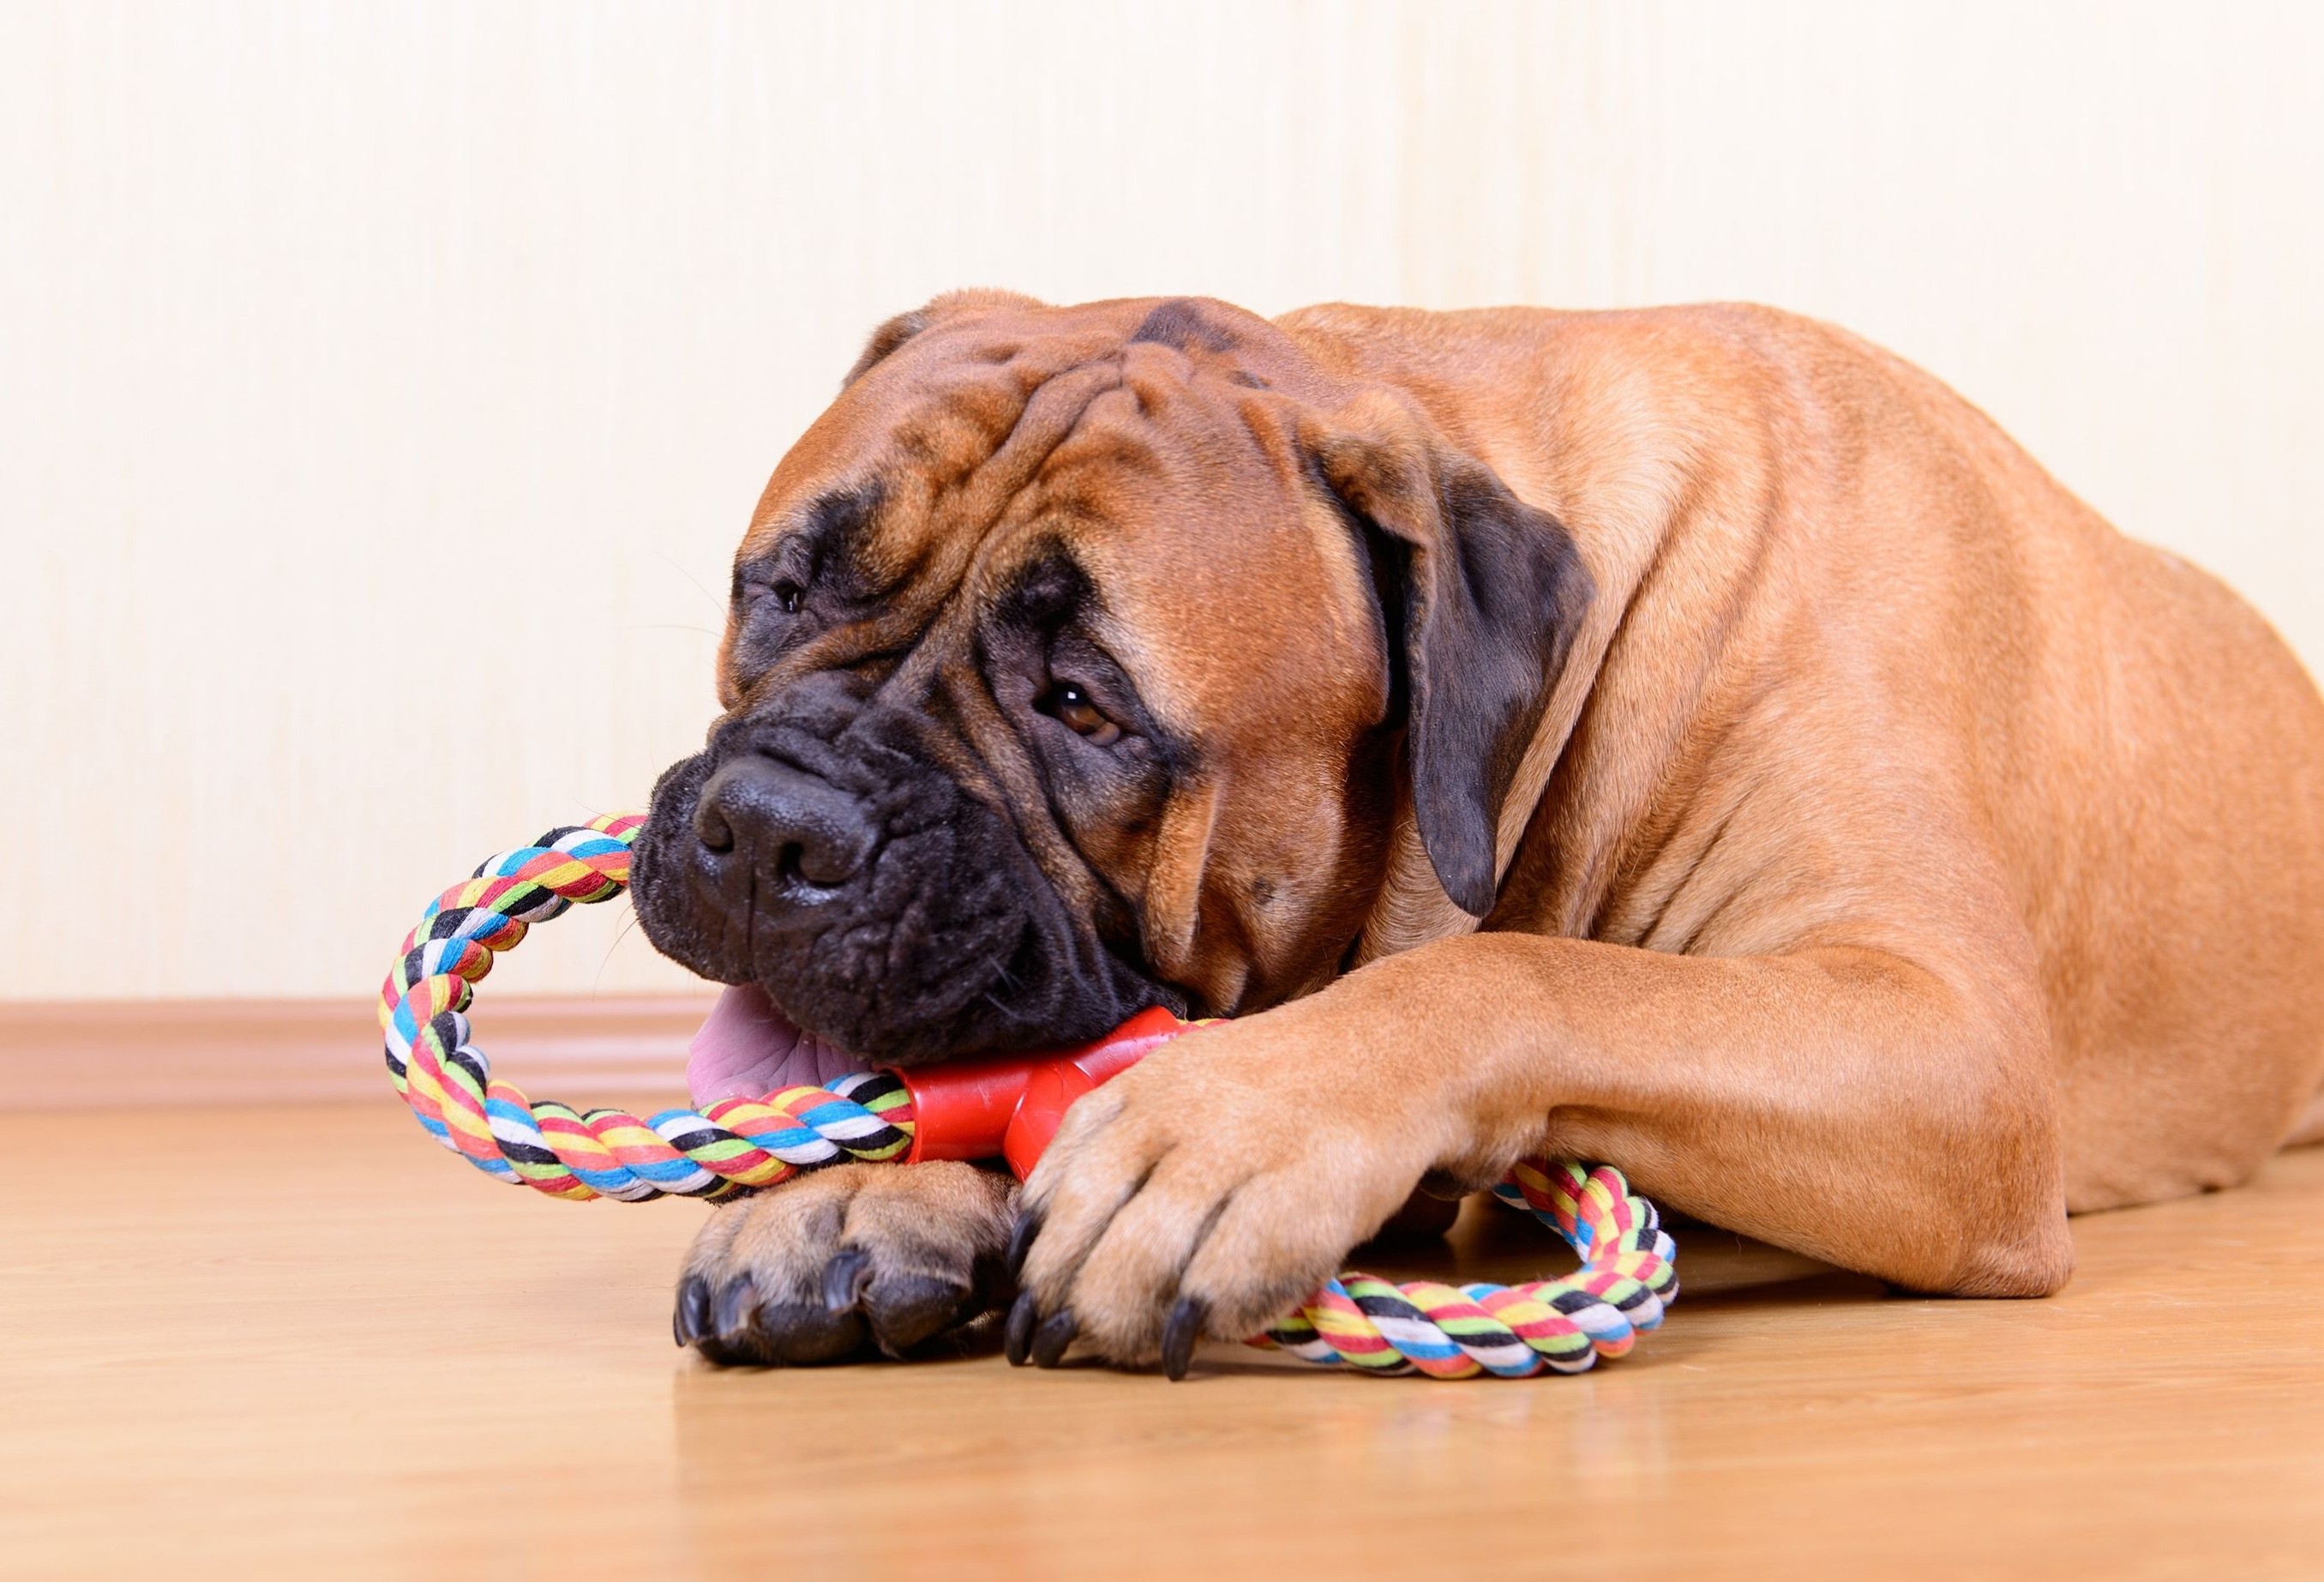 How to Prevent Separation Anxiety - Separation Training For Dogs